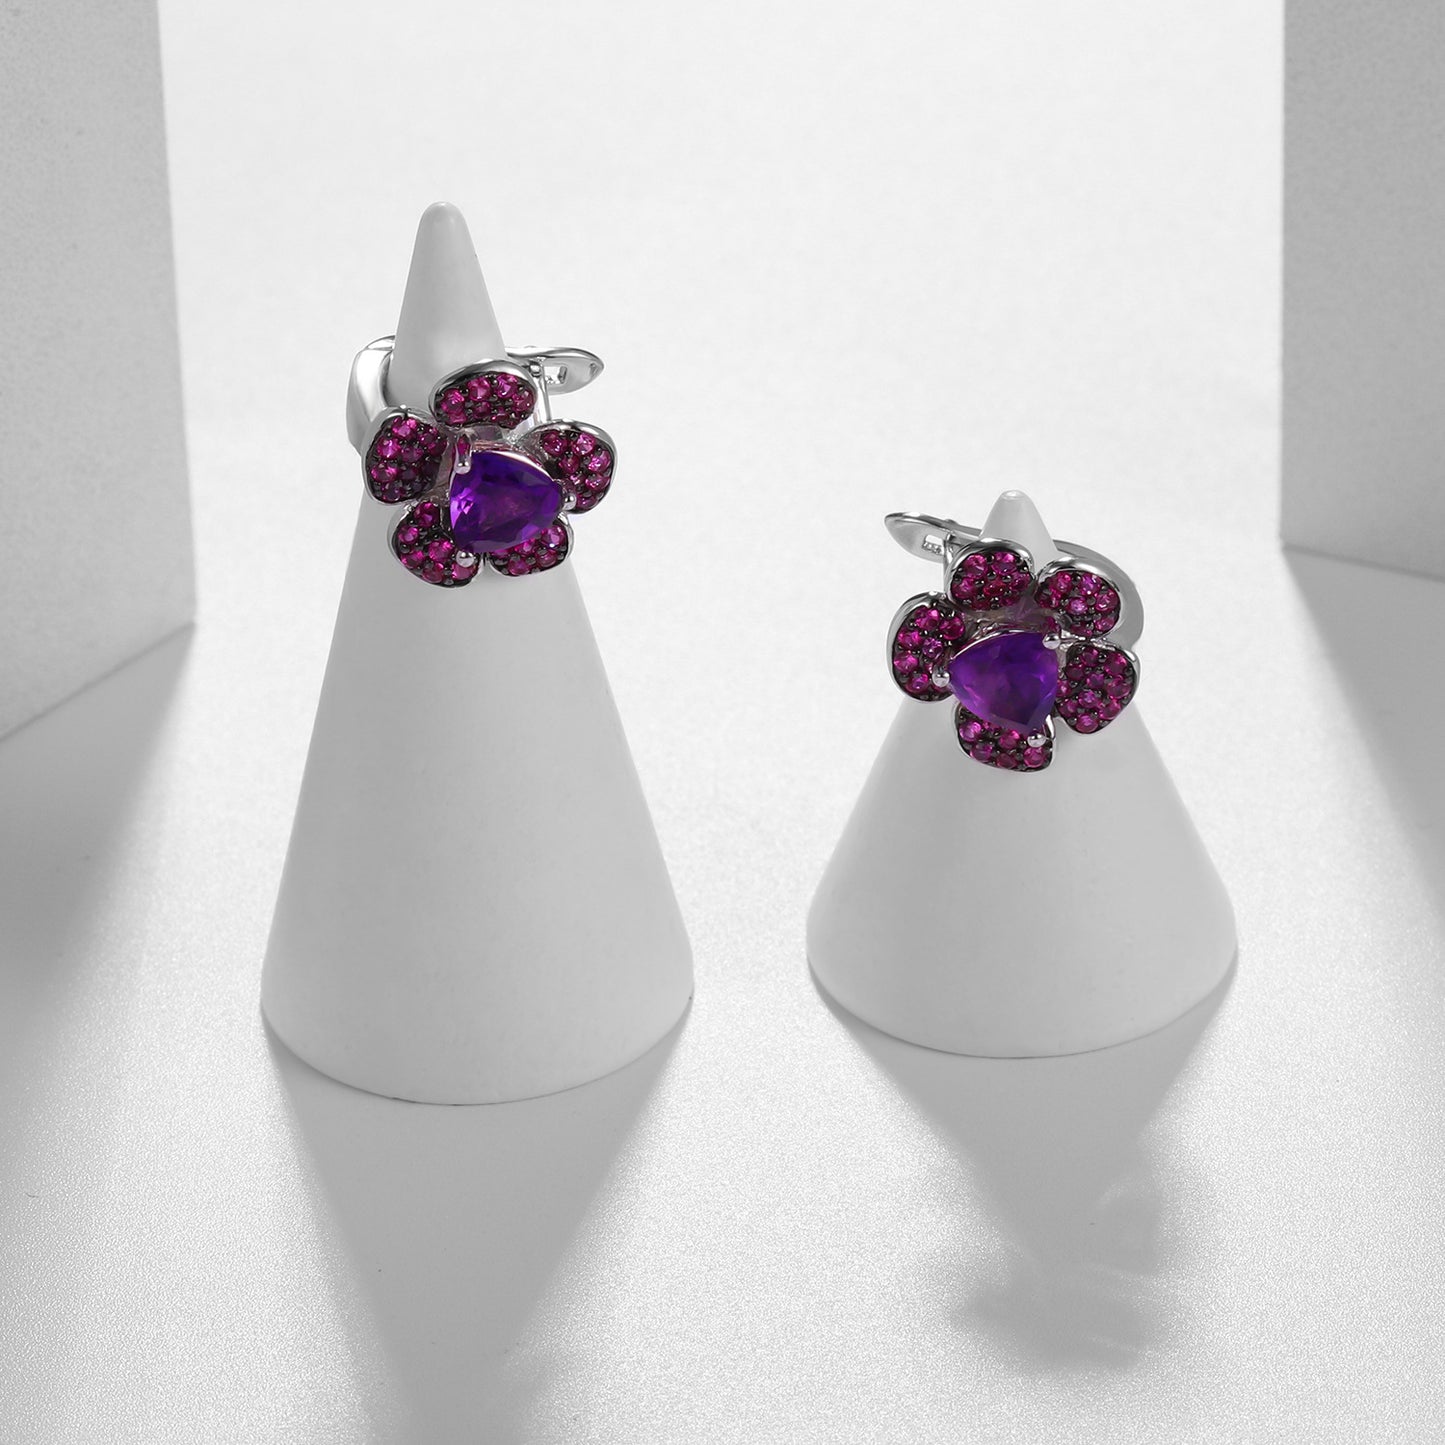 Simple Natural Style Inlaid Colourful Gemstoes Flower Silver Studs Earrings for Women